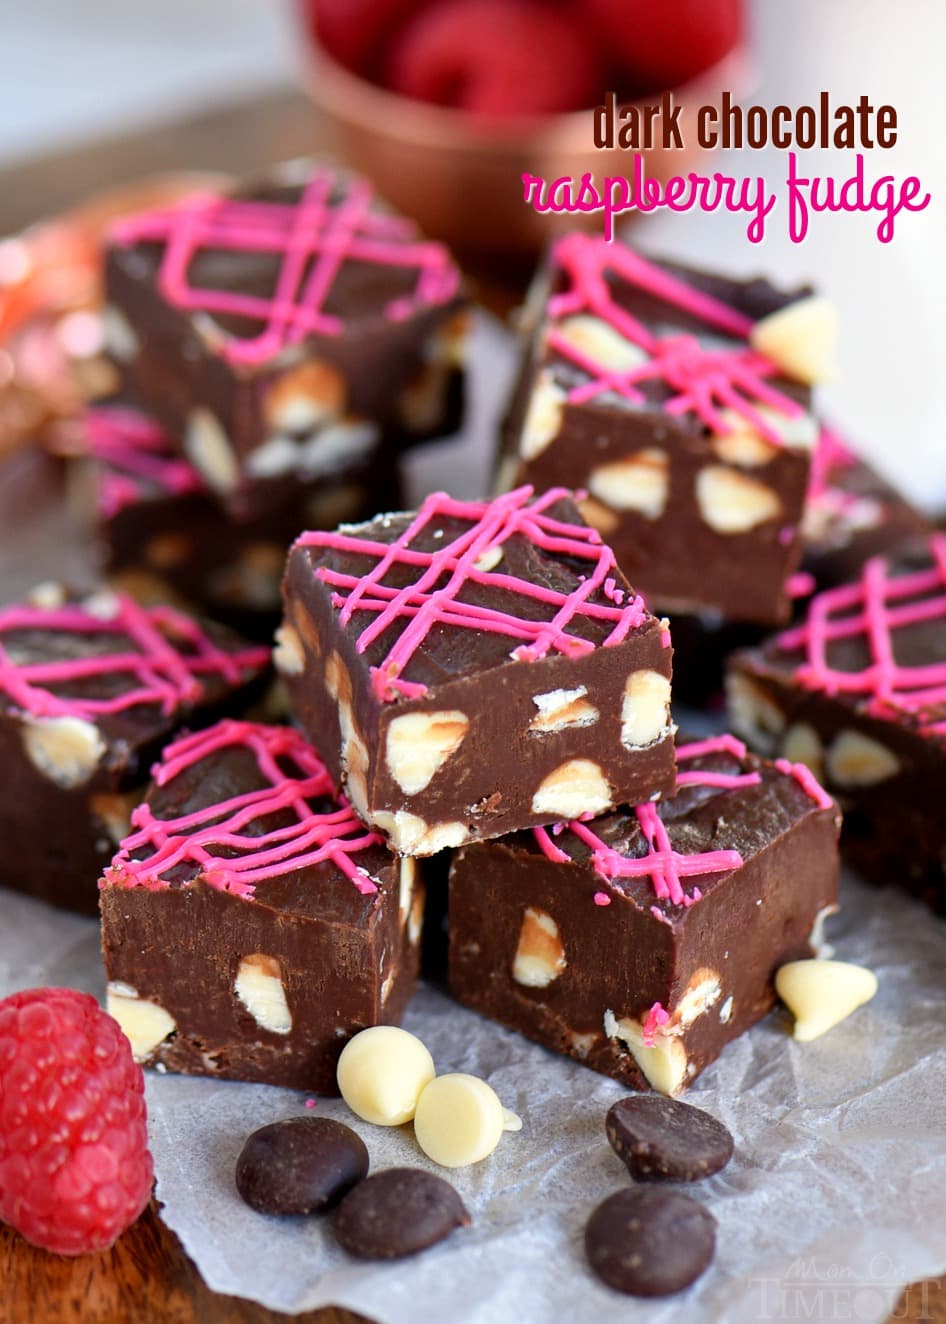 Fudge doesn’t get better or easier than this Dark Chocolate Raspberry Fudge. It’s the perfect quick treat for any occasion! Incredibly decadent and gorgeous to boot this easy fudge recipe takes just 5 minutes to make! Perfect for Valentine's Day and Christmas! // Mom On Timeout